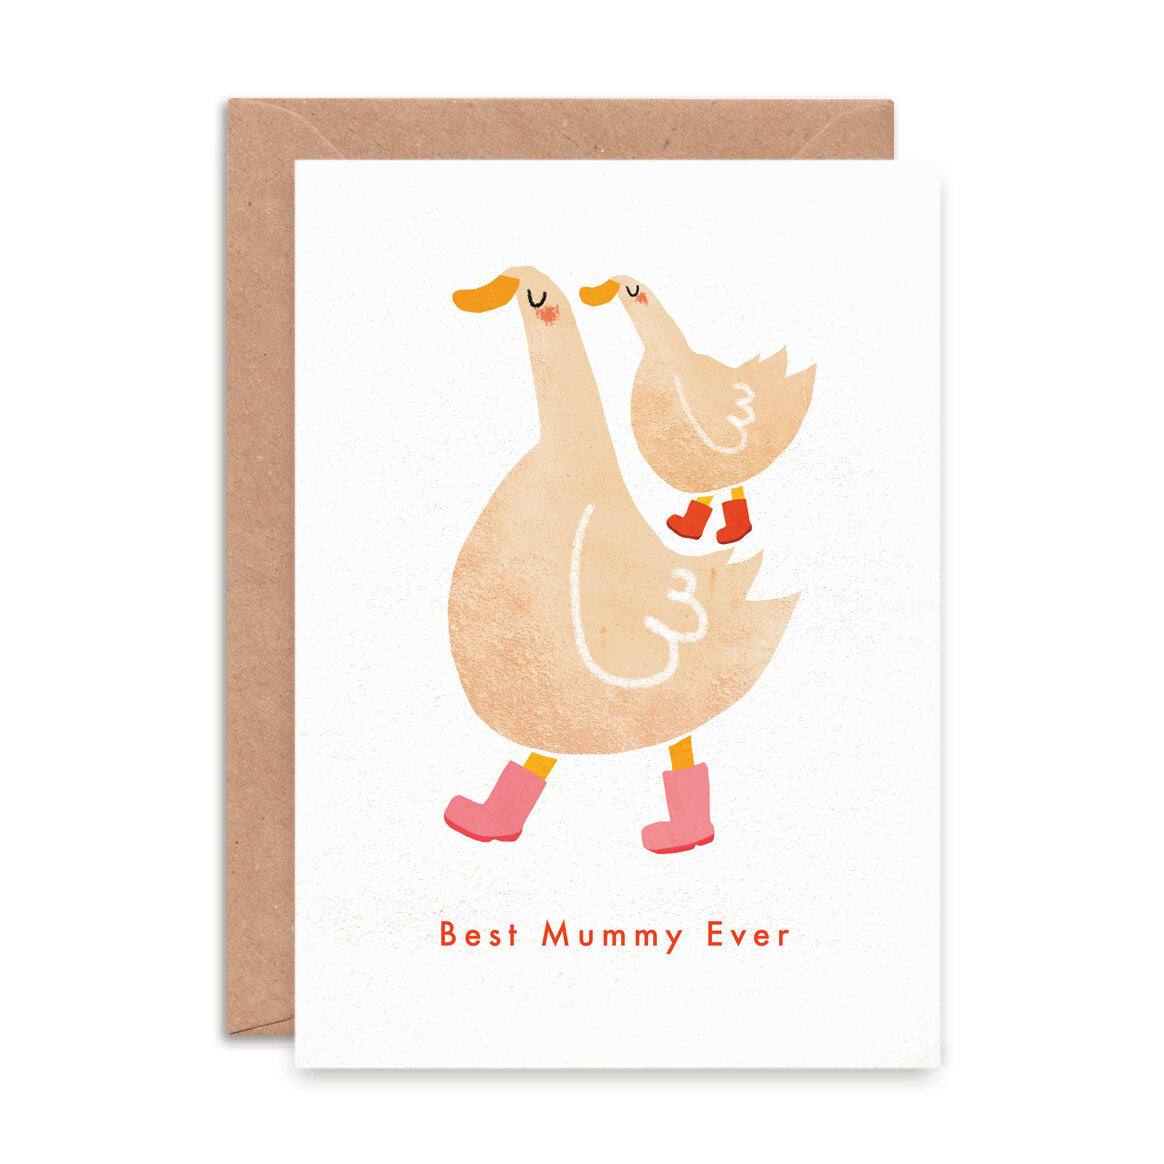 Baby Duck on the back of Mummy Duck mothers day card, with the words Best Mummy Ever